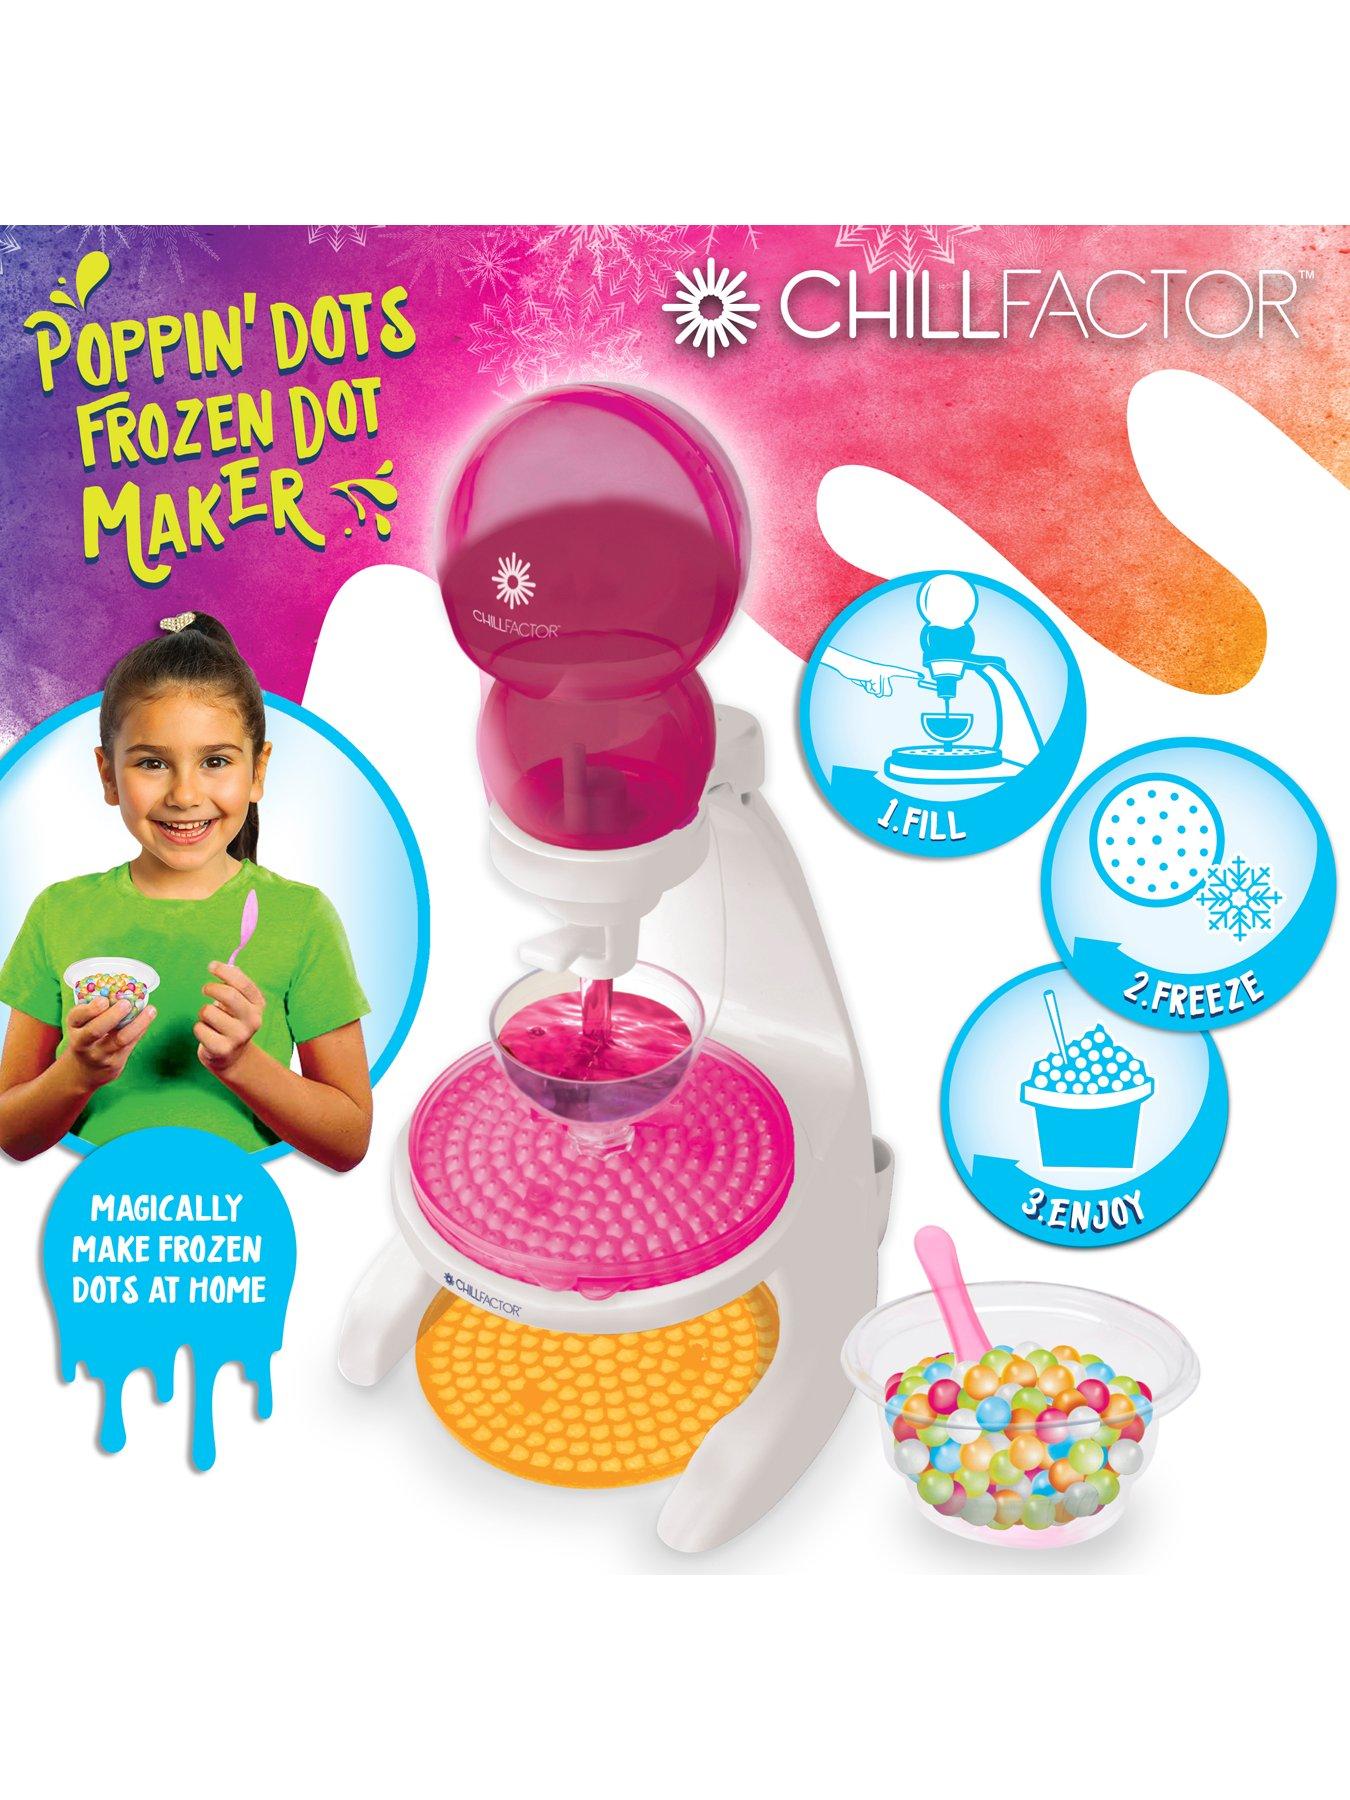 Dippin Dots Frozen Dot Maker, Includes maker, 6 trays, 4 bowls, 4 spoons, 2  pop pens, Instructions, Enjoy Dippin Dots at home, Use any soda, juice or